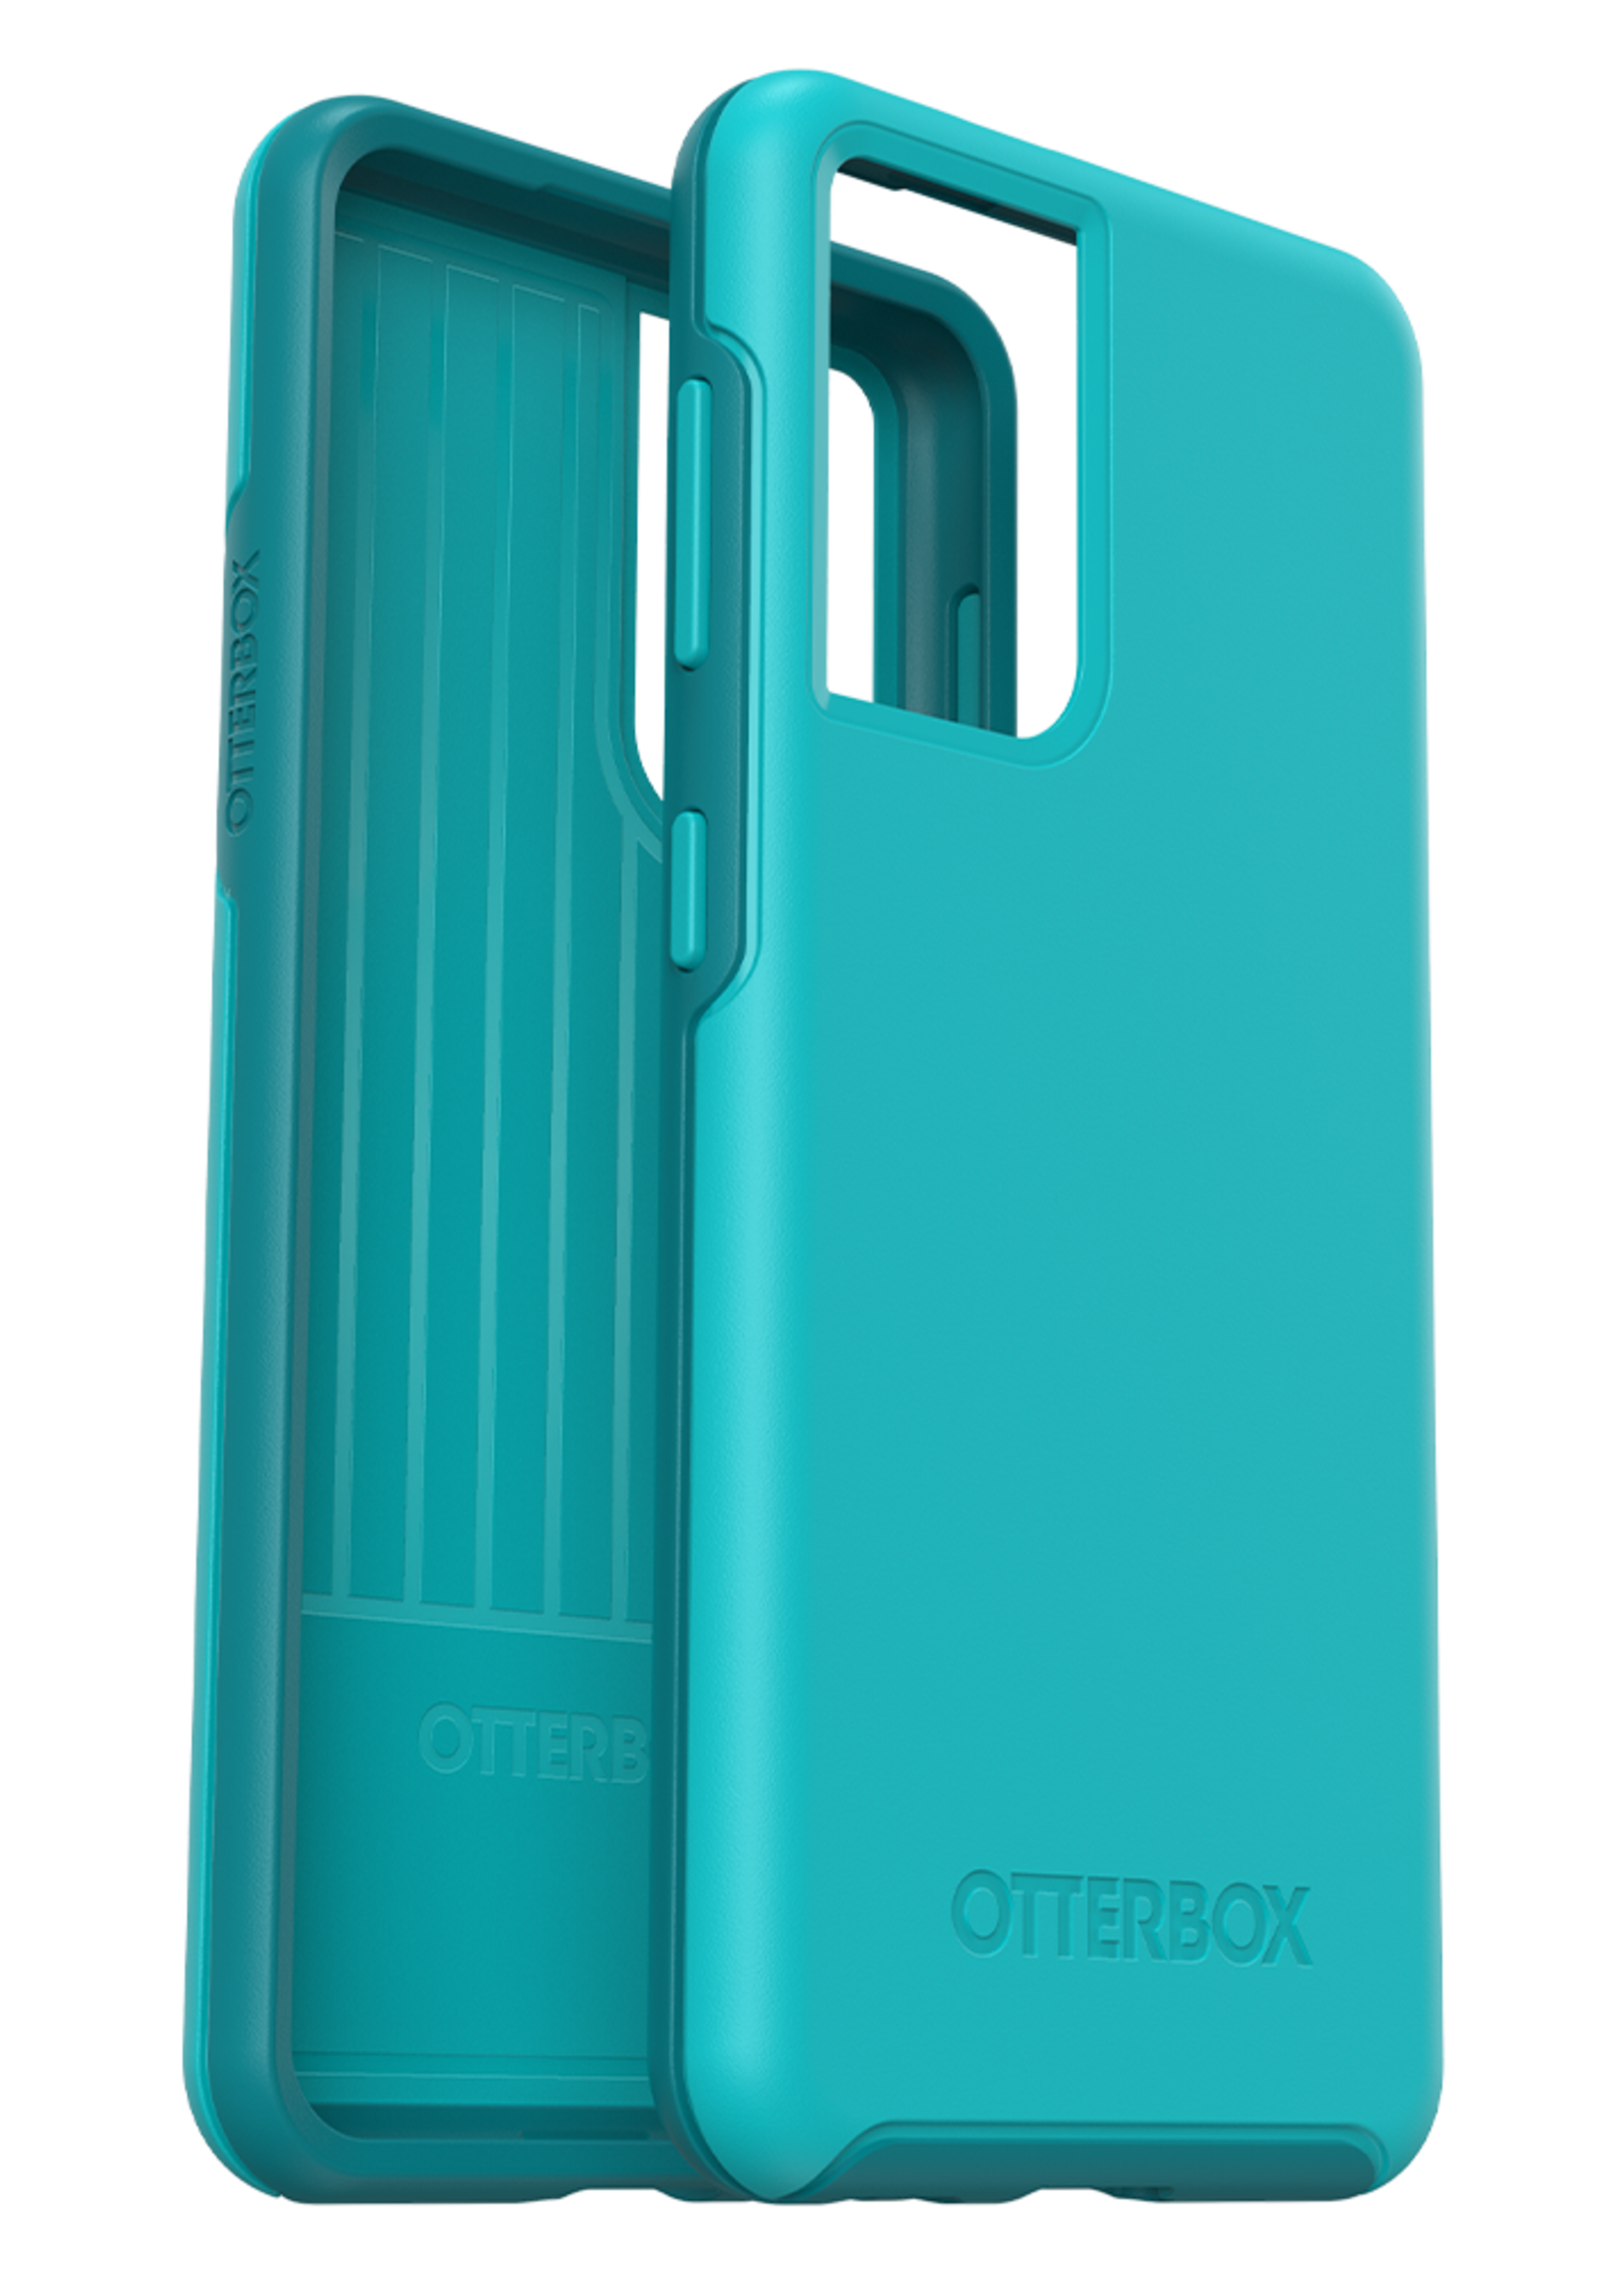 Otterbox OtterBox - Symmetry Antimicrobial Case for Samsung Galaxy S21 5G - Rock Candy